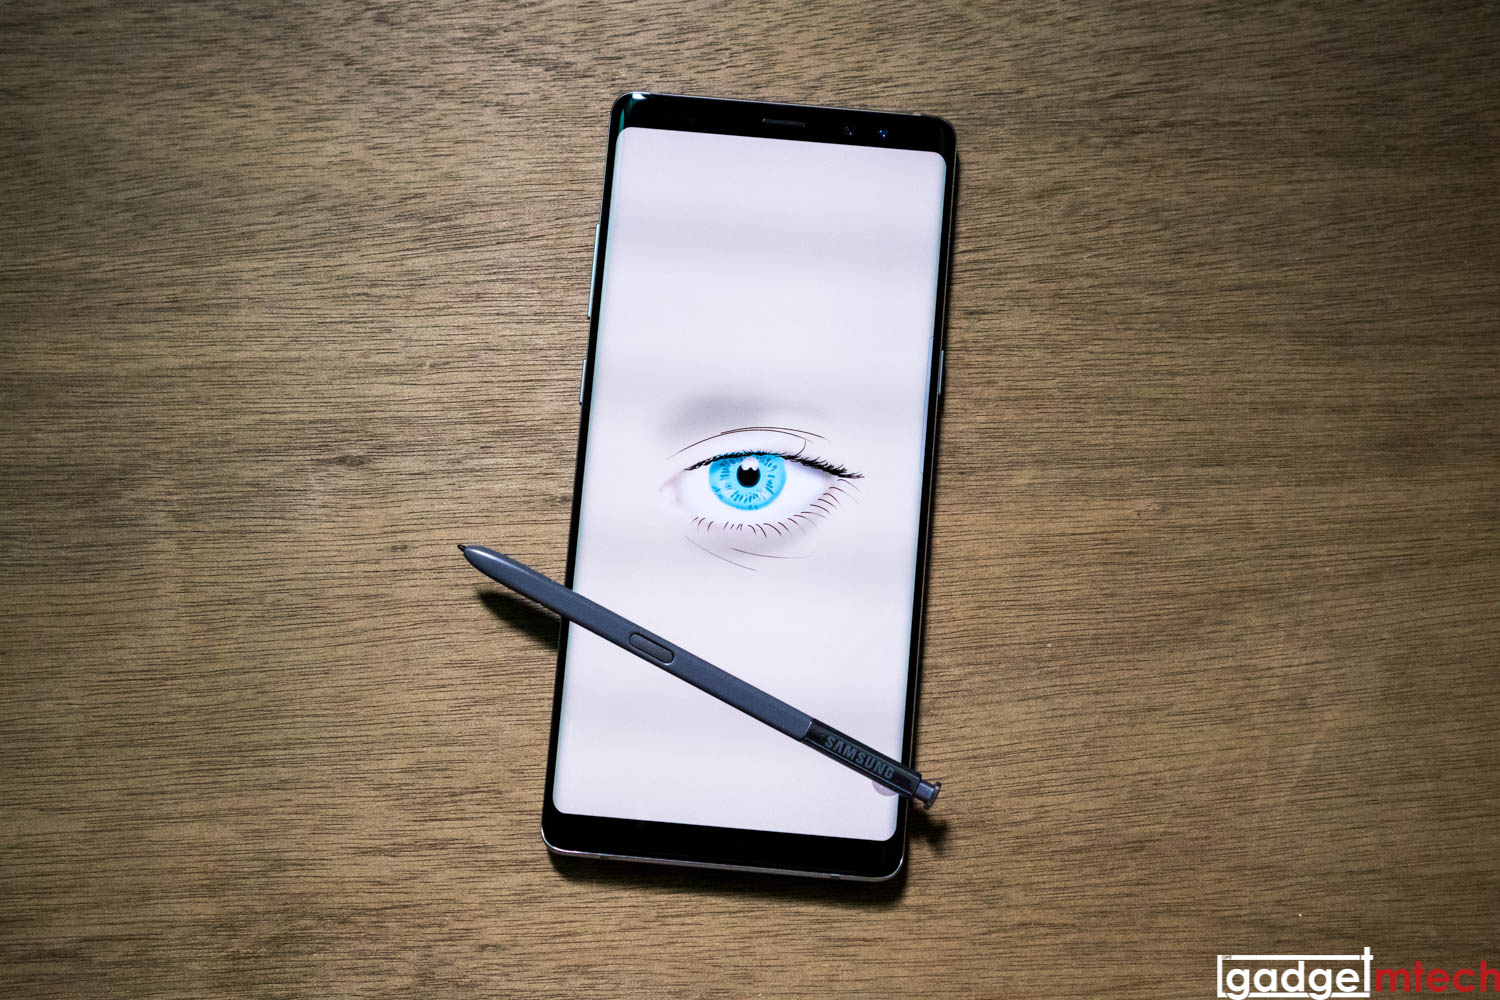 Samsung Galaxy Note8 Review: The Best So Far